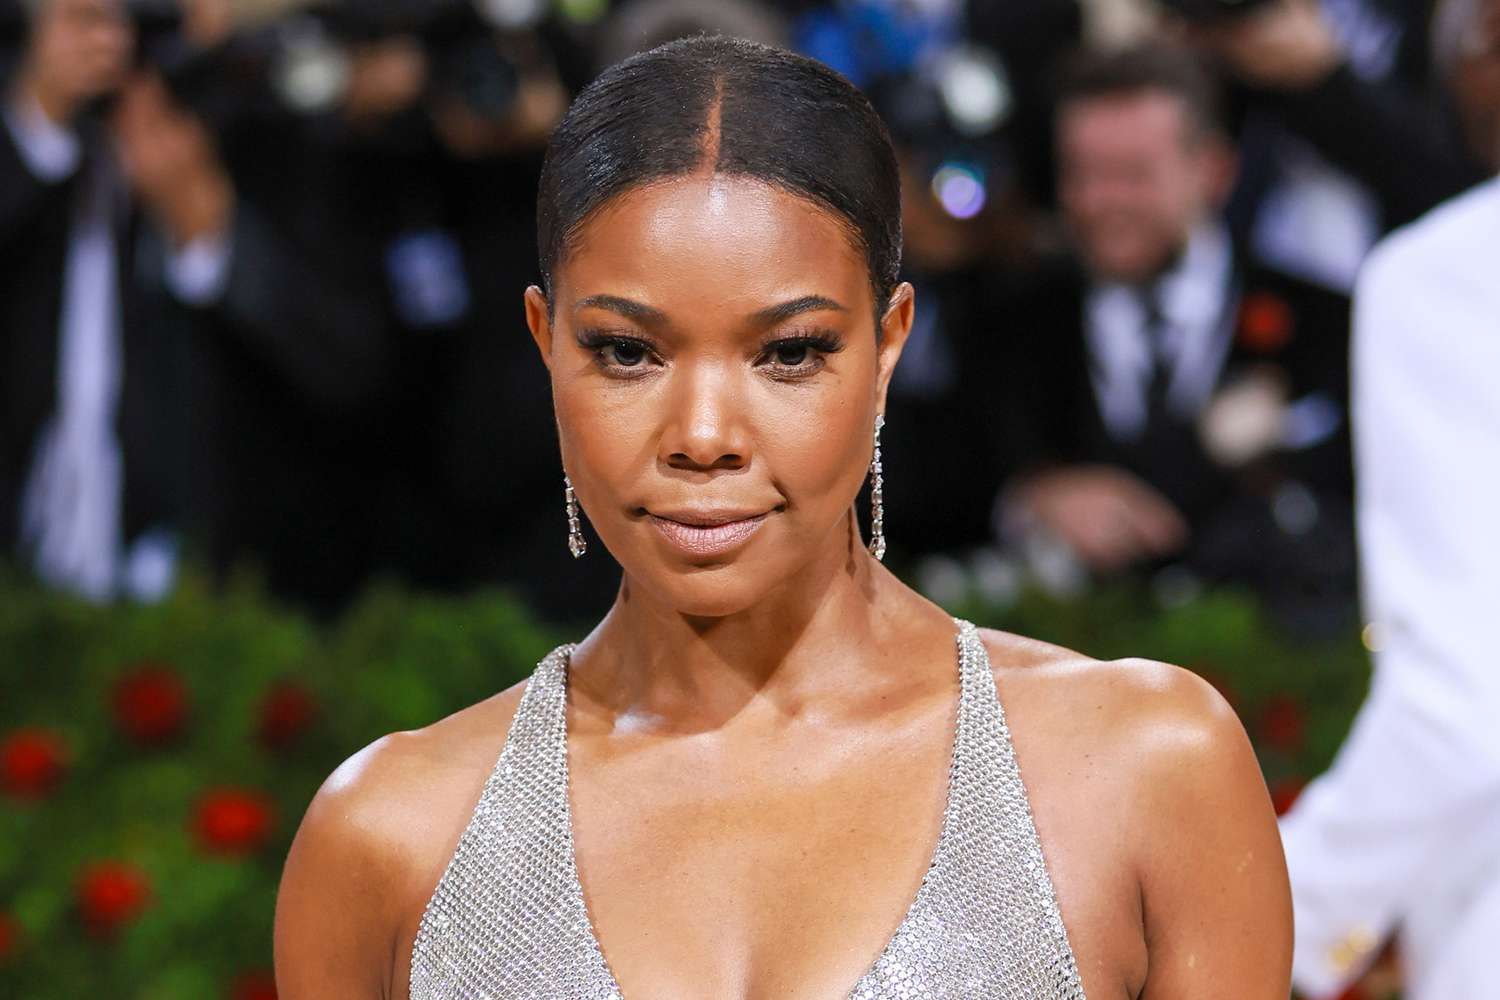 Watch Gabrielle Union Crush a Series of Full-Body Exercises